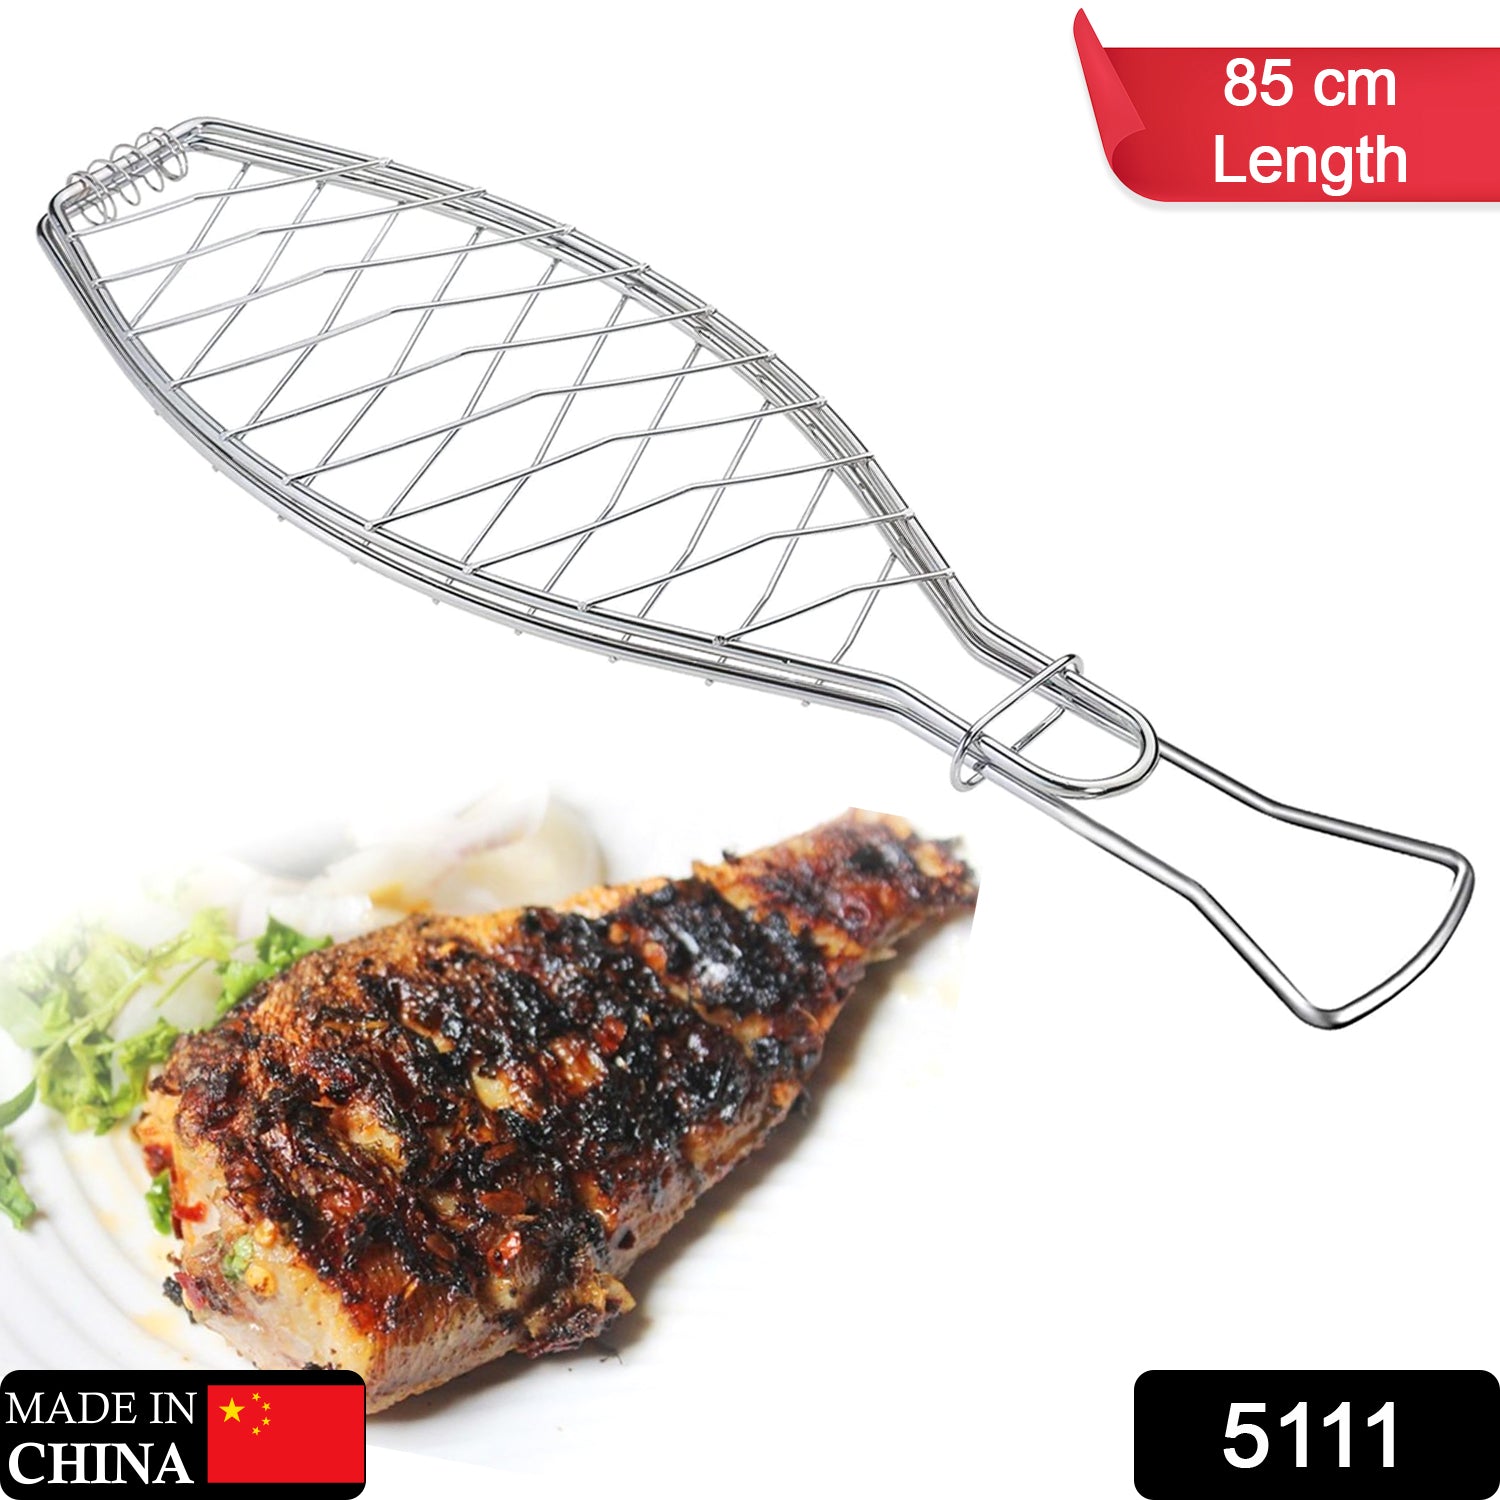 5111 Stainless Steel BBQ Barbecue Fish Grill Net Basket, Standard, Silver 